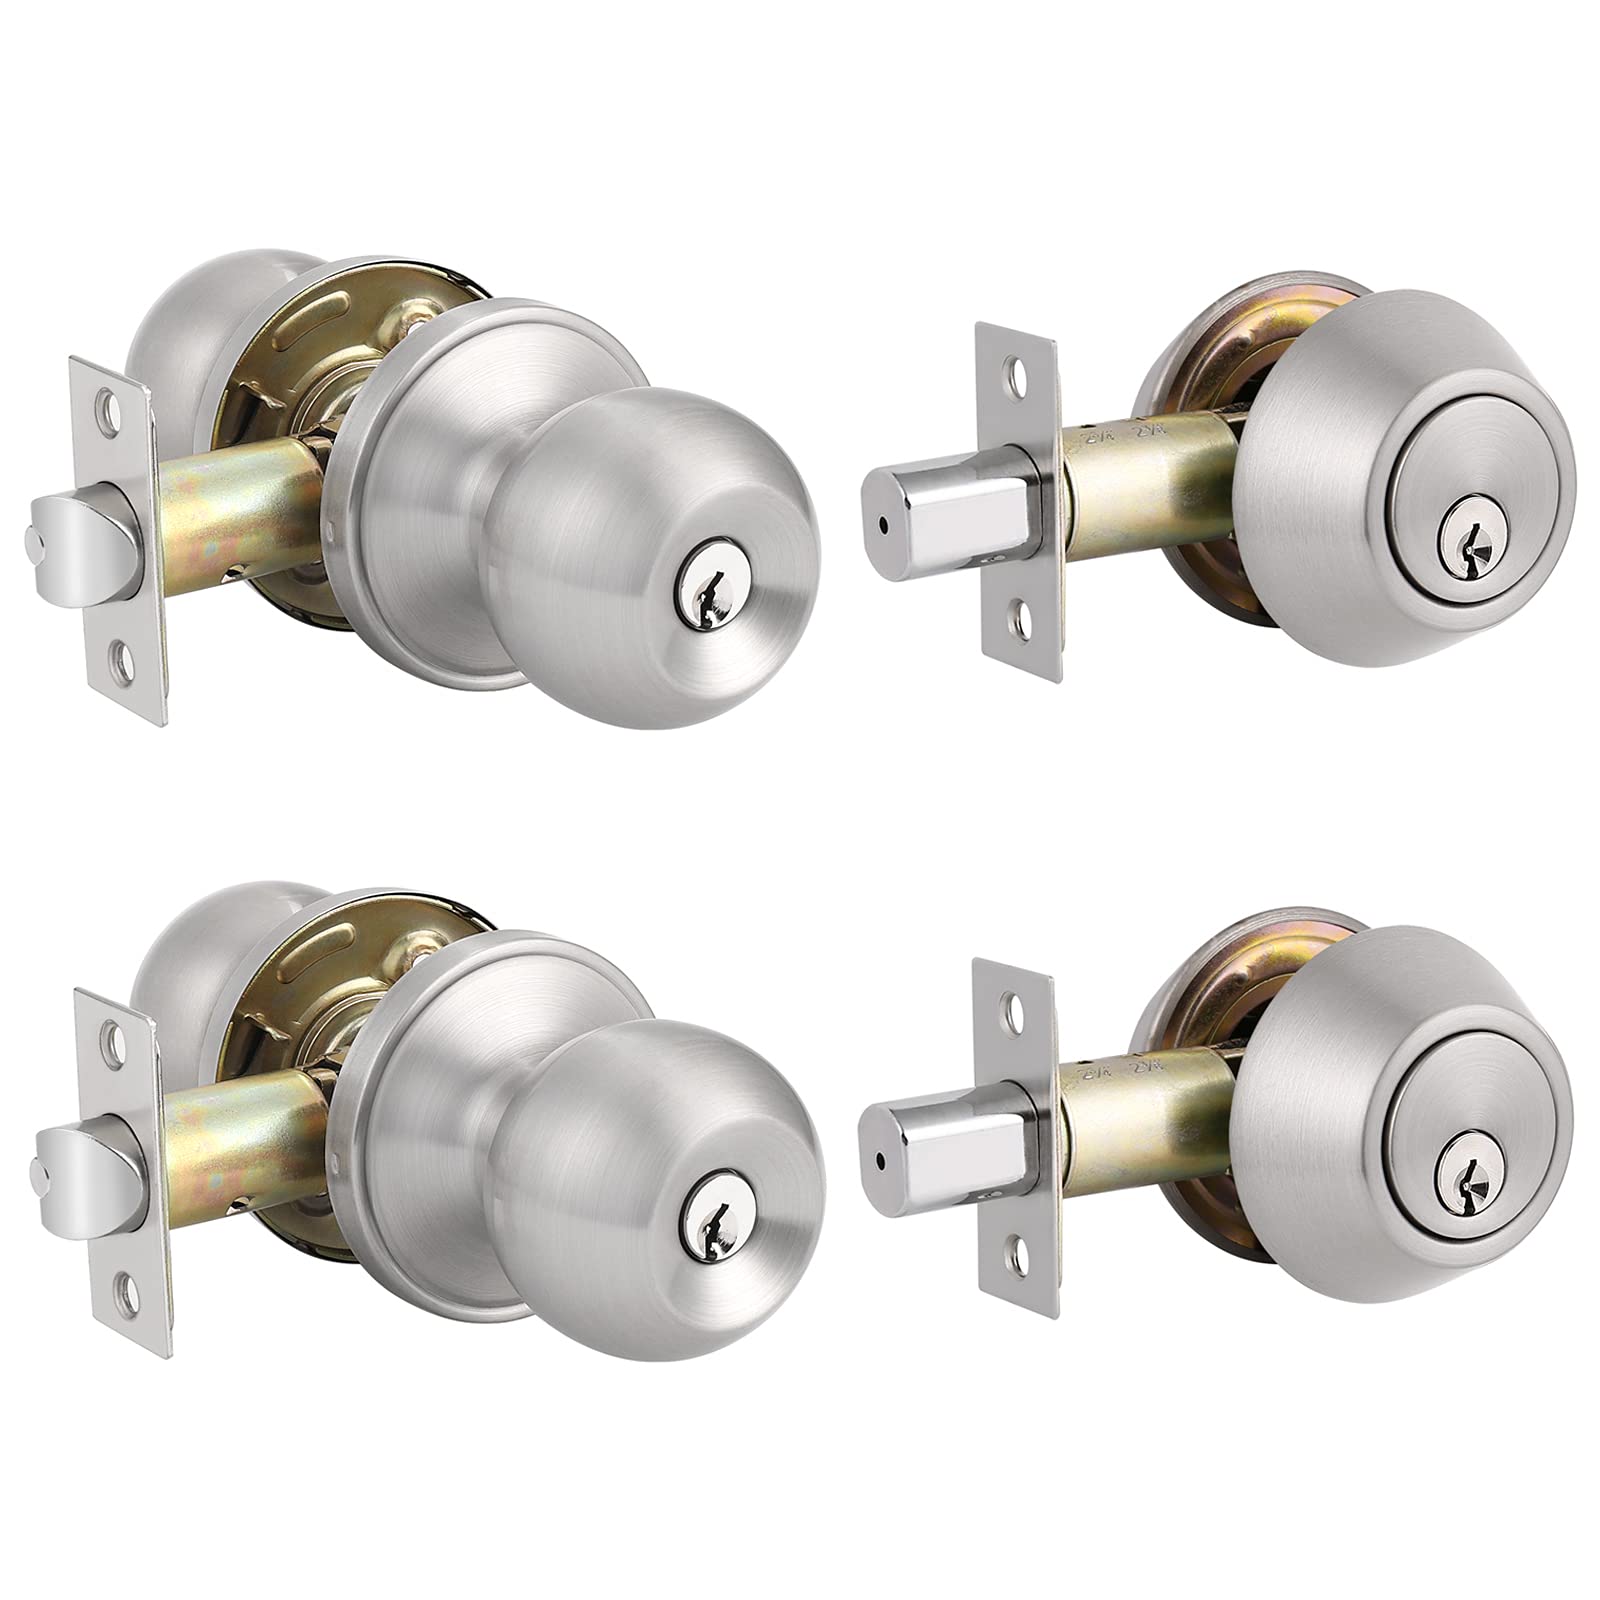 Knobonly 2 Sets Entry Knob and Double cylinder Deadbolt, Keyed Alike combo Pack combination, Locked Inside or Outside with Keys,